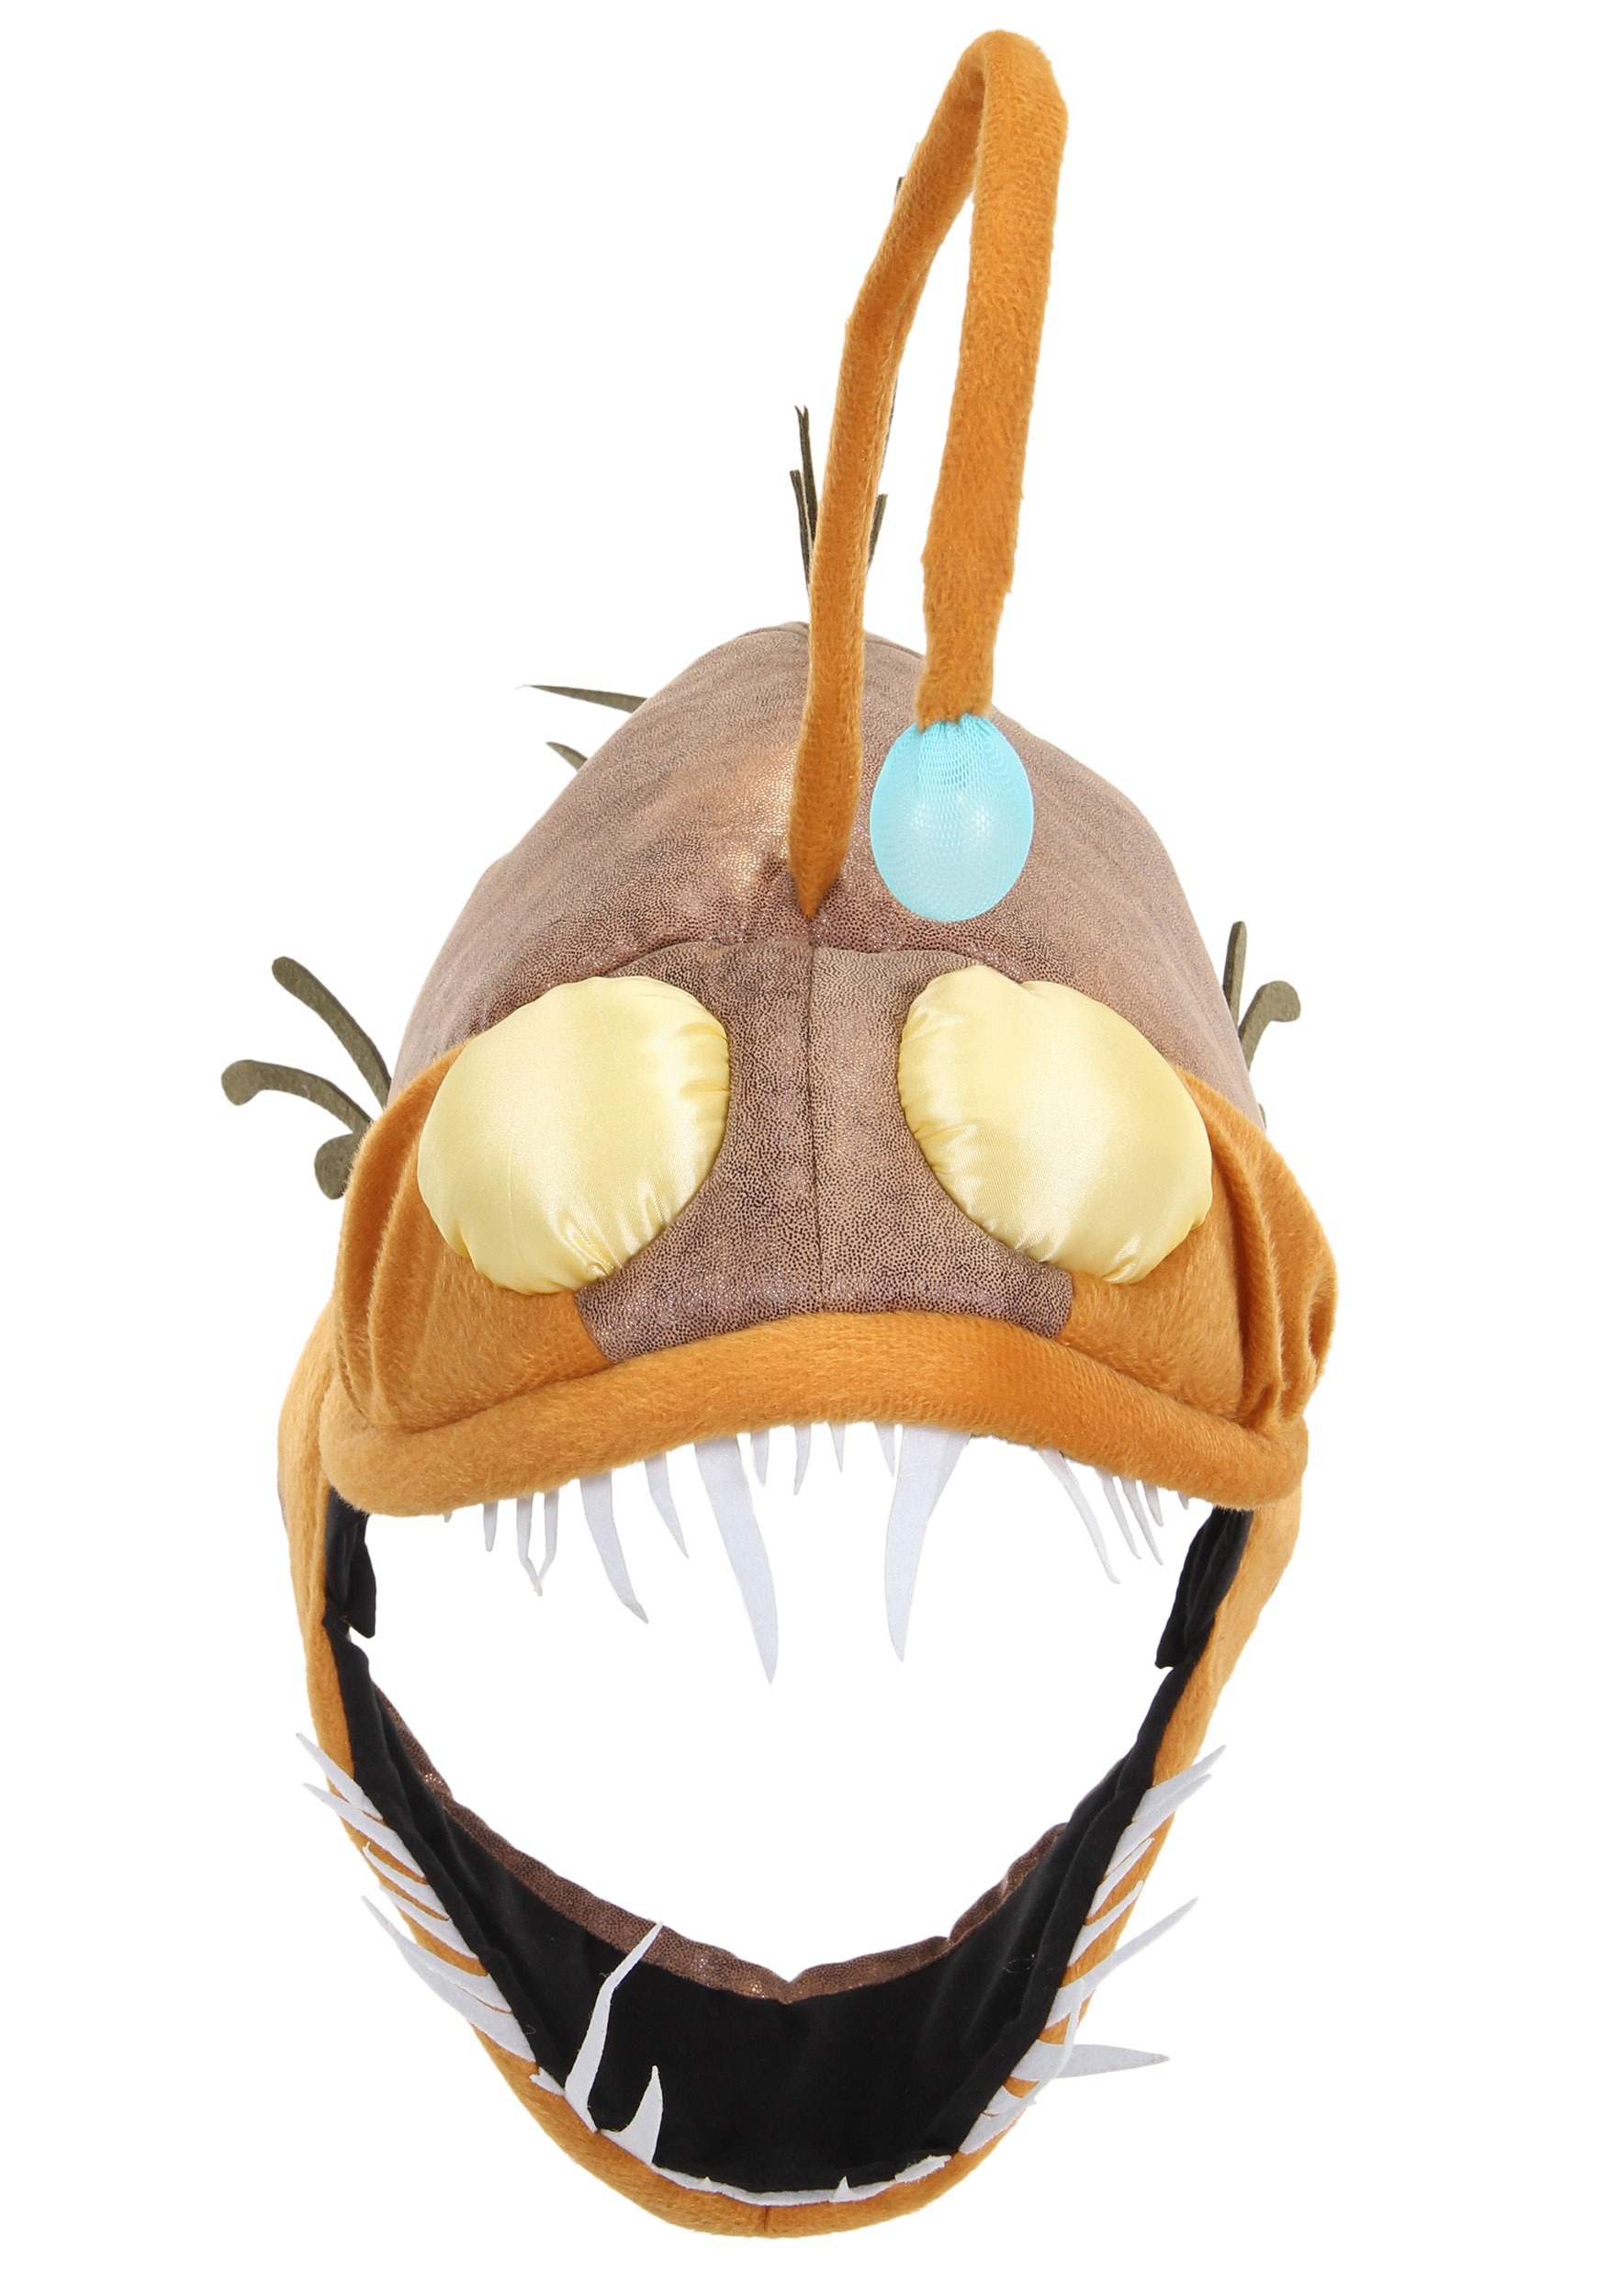 elope Light-Up Angler Fish Jawesome Hat